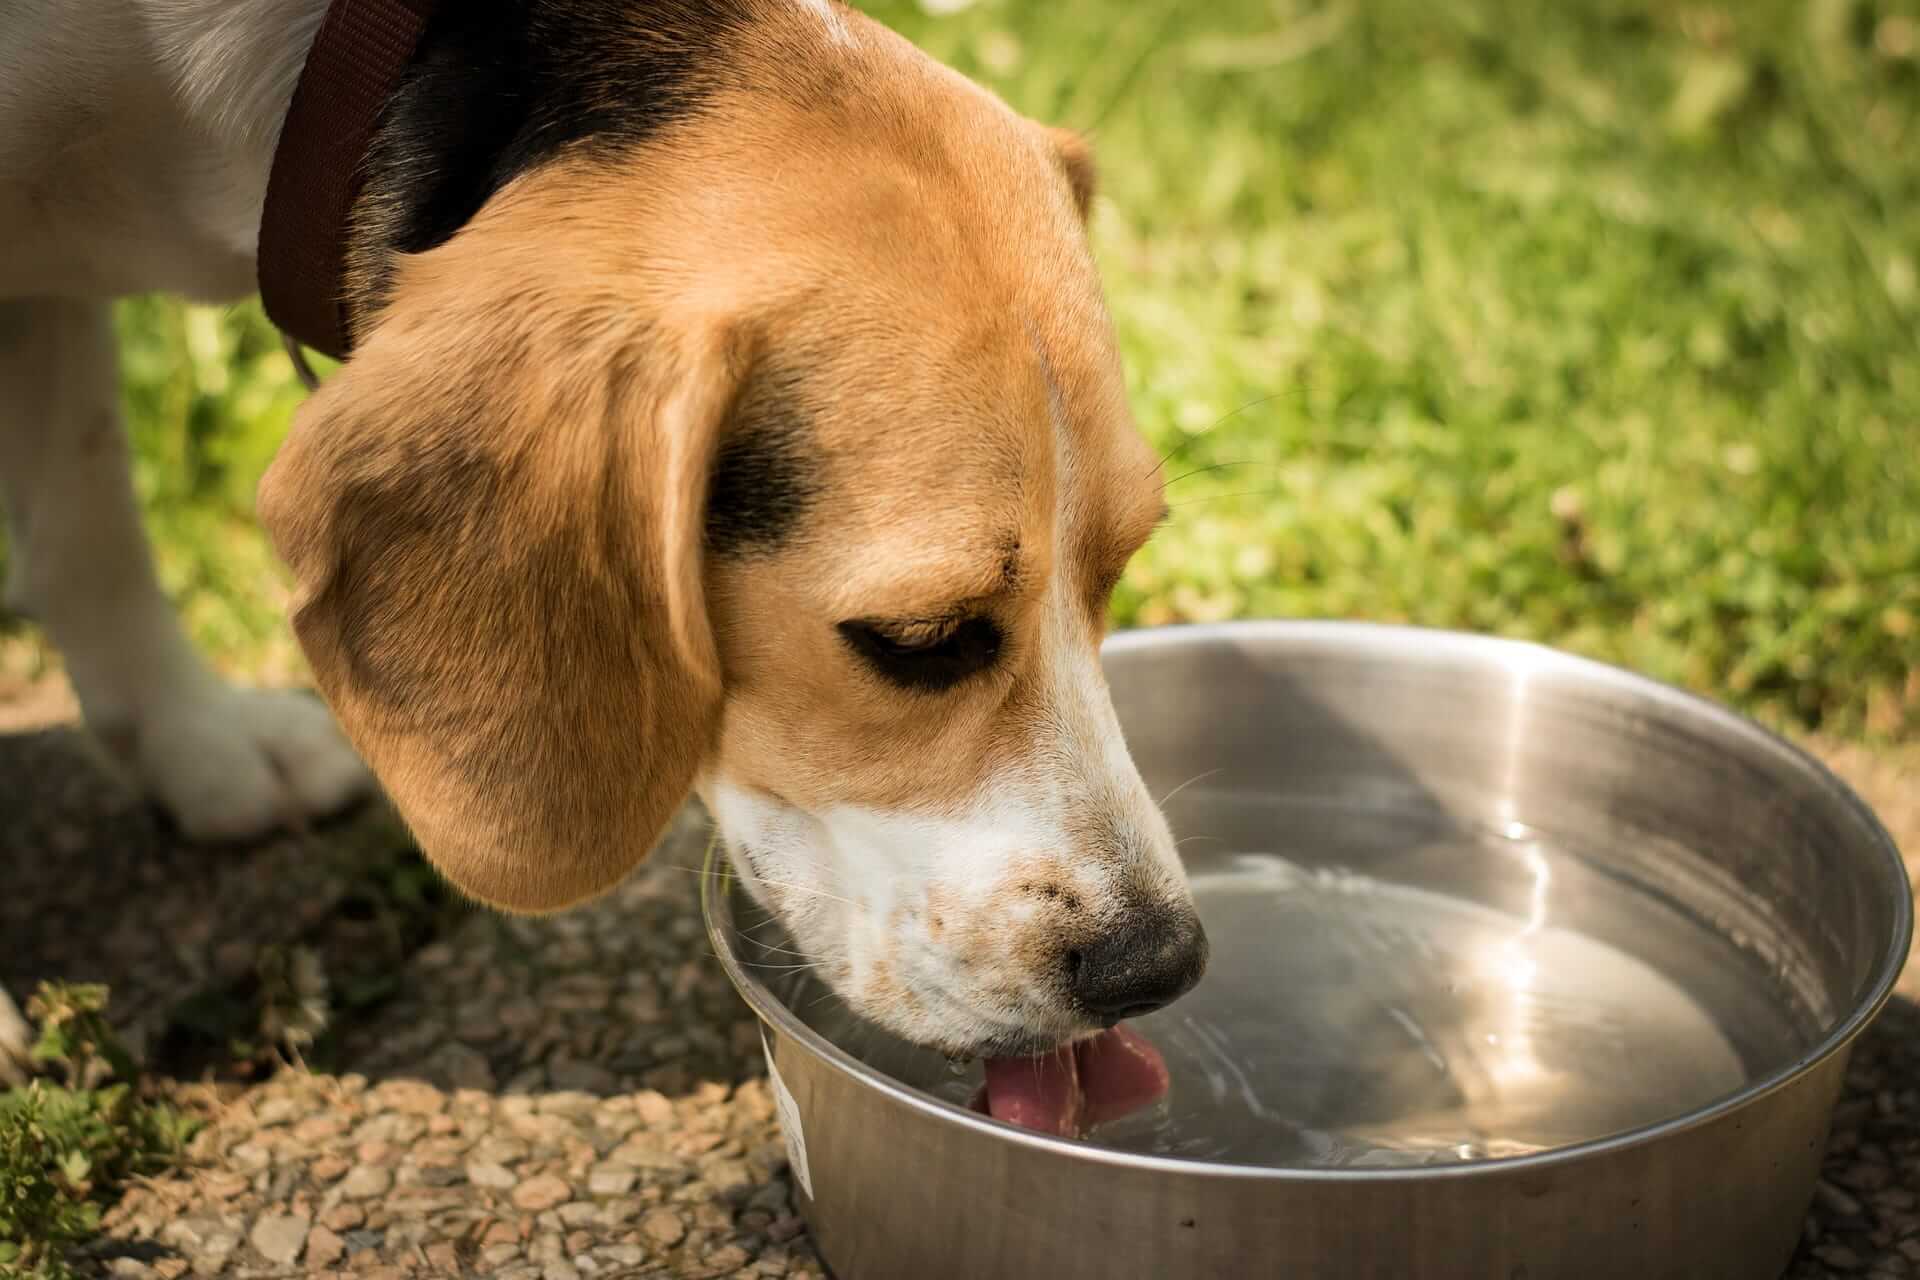 Your Why is my puppy not drinking water?